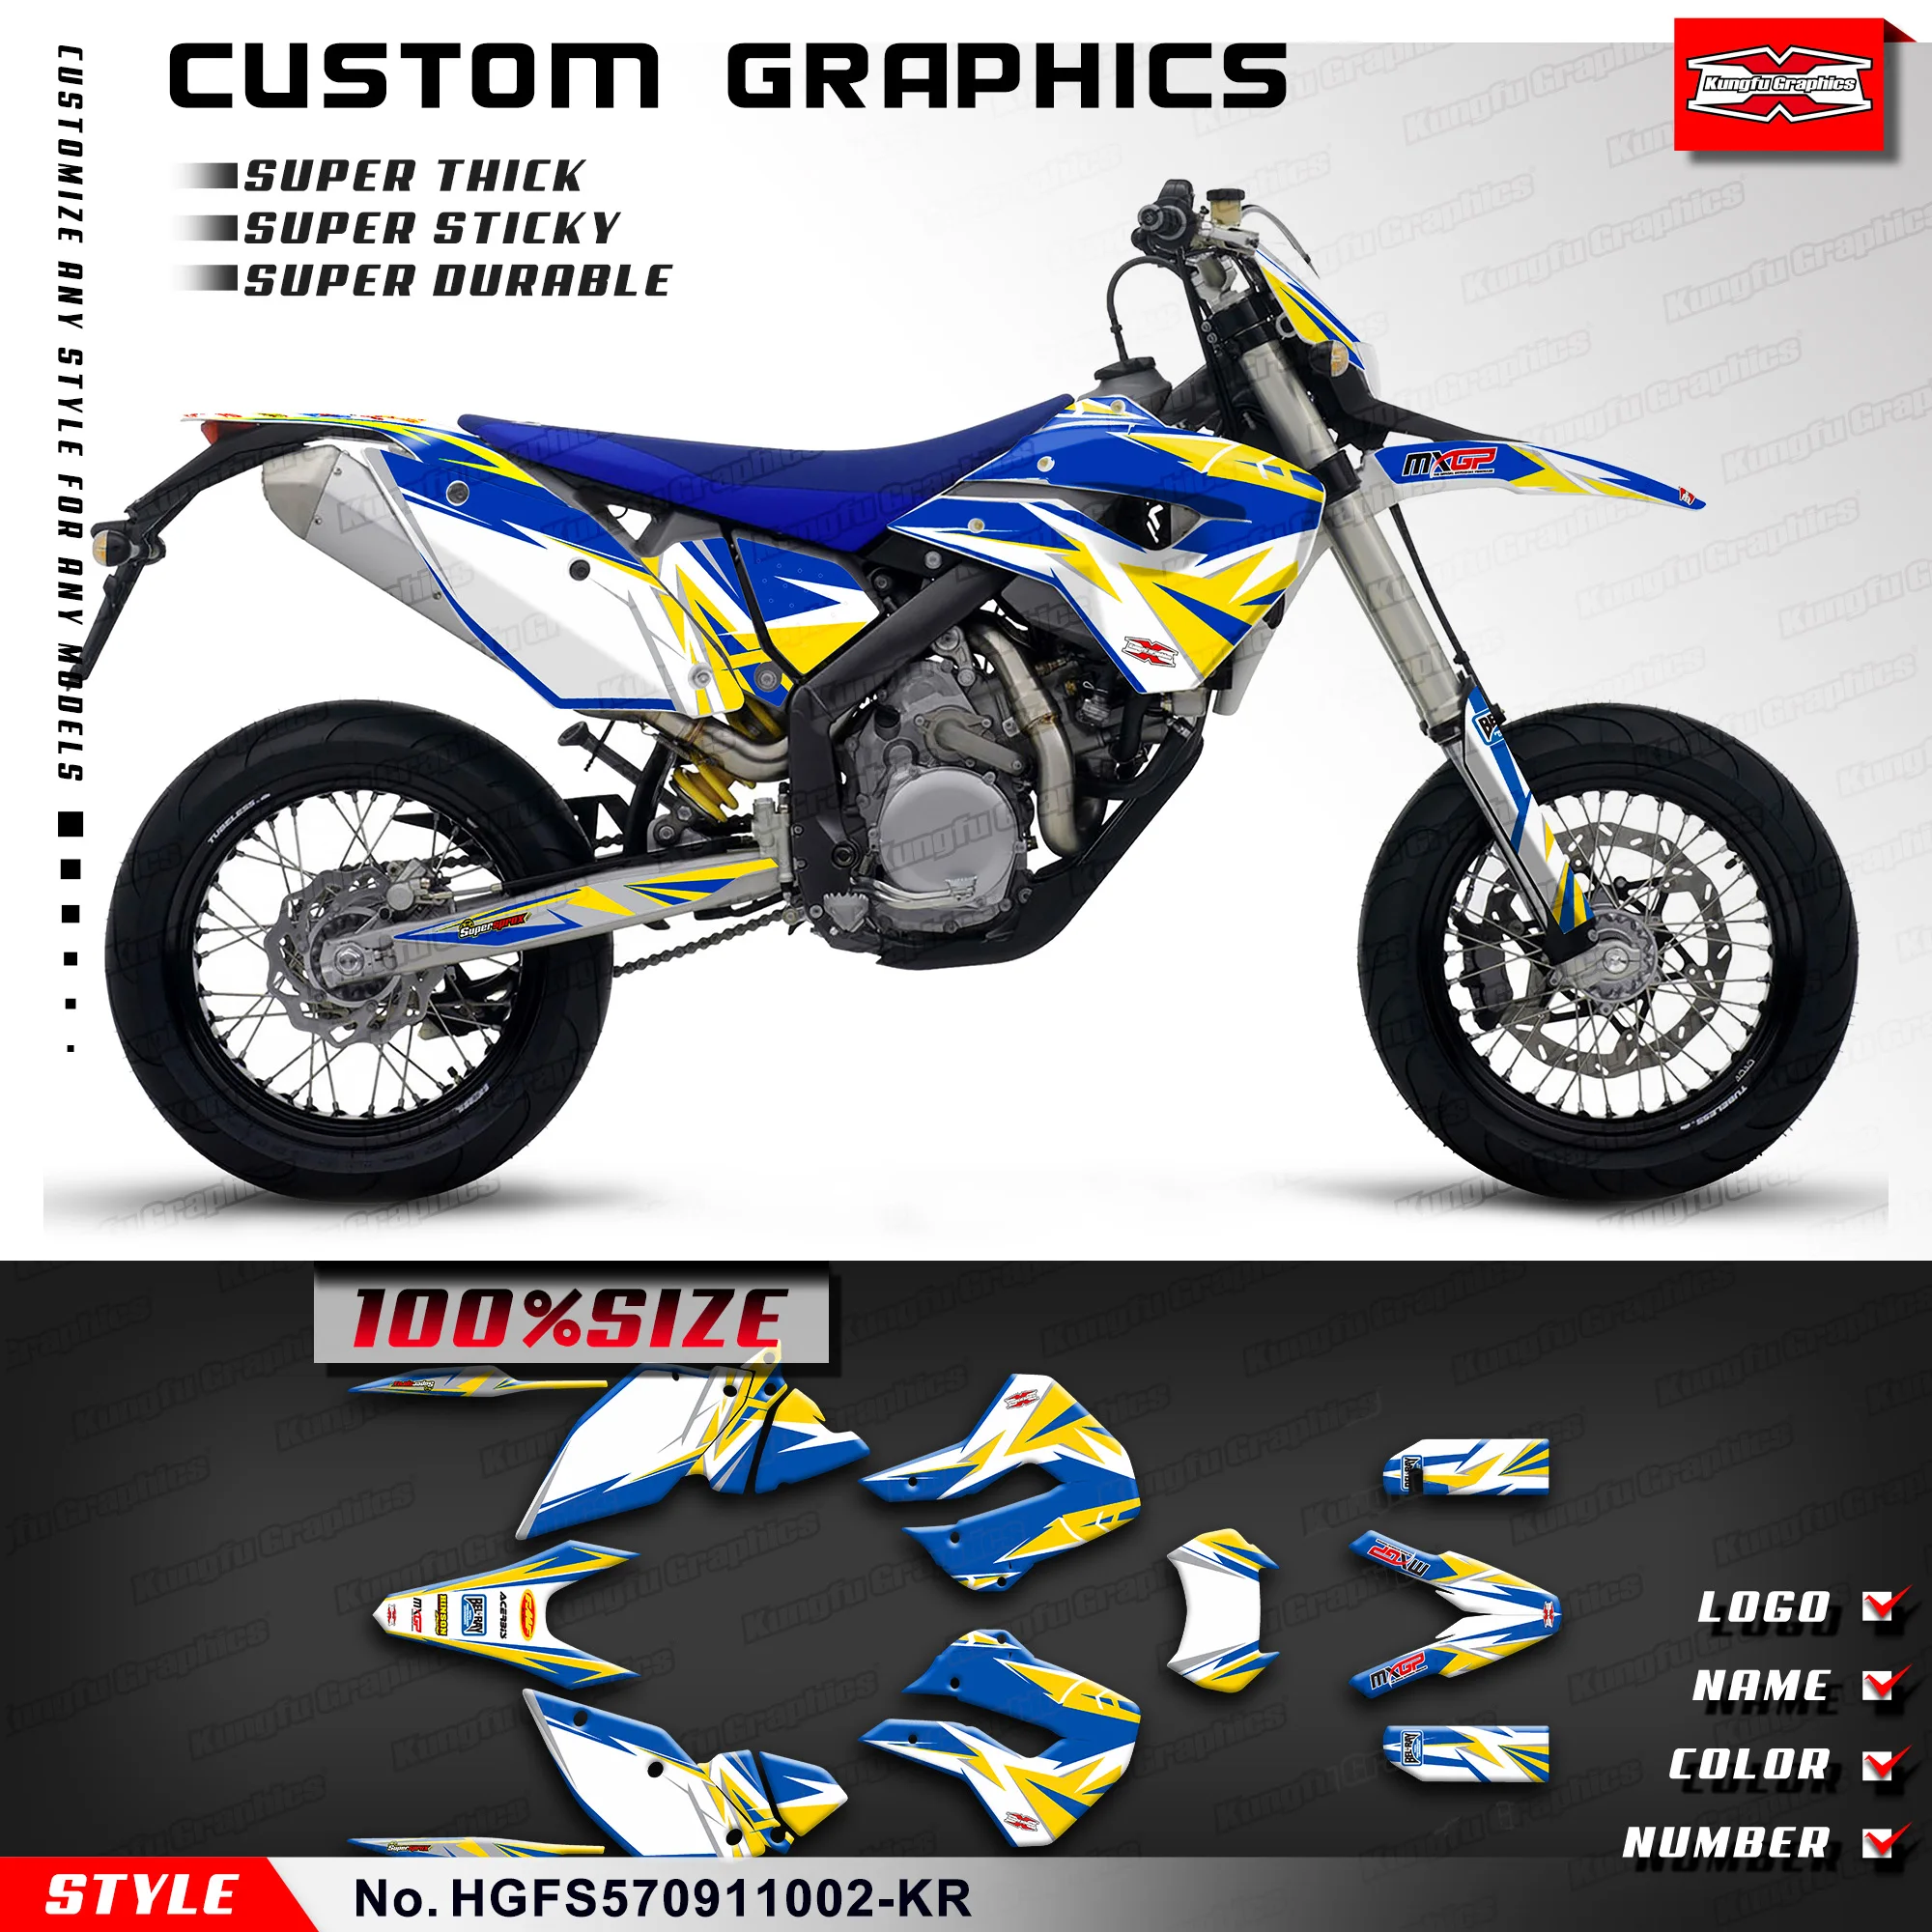 

KUNGFU GRAPHICS Decals Stickers UV Resistant Laminate for Husaberg FS 570 2009 2010 2011, HGFS570911002-KR